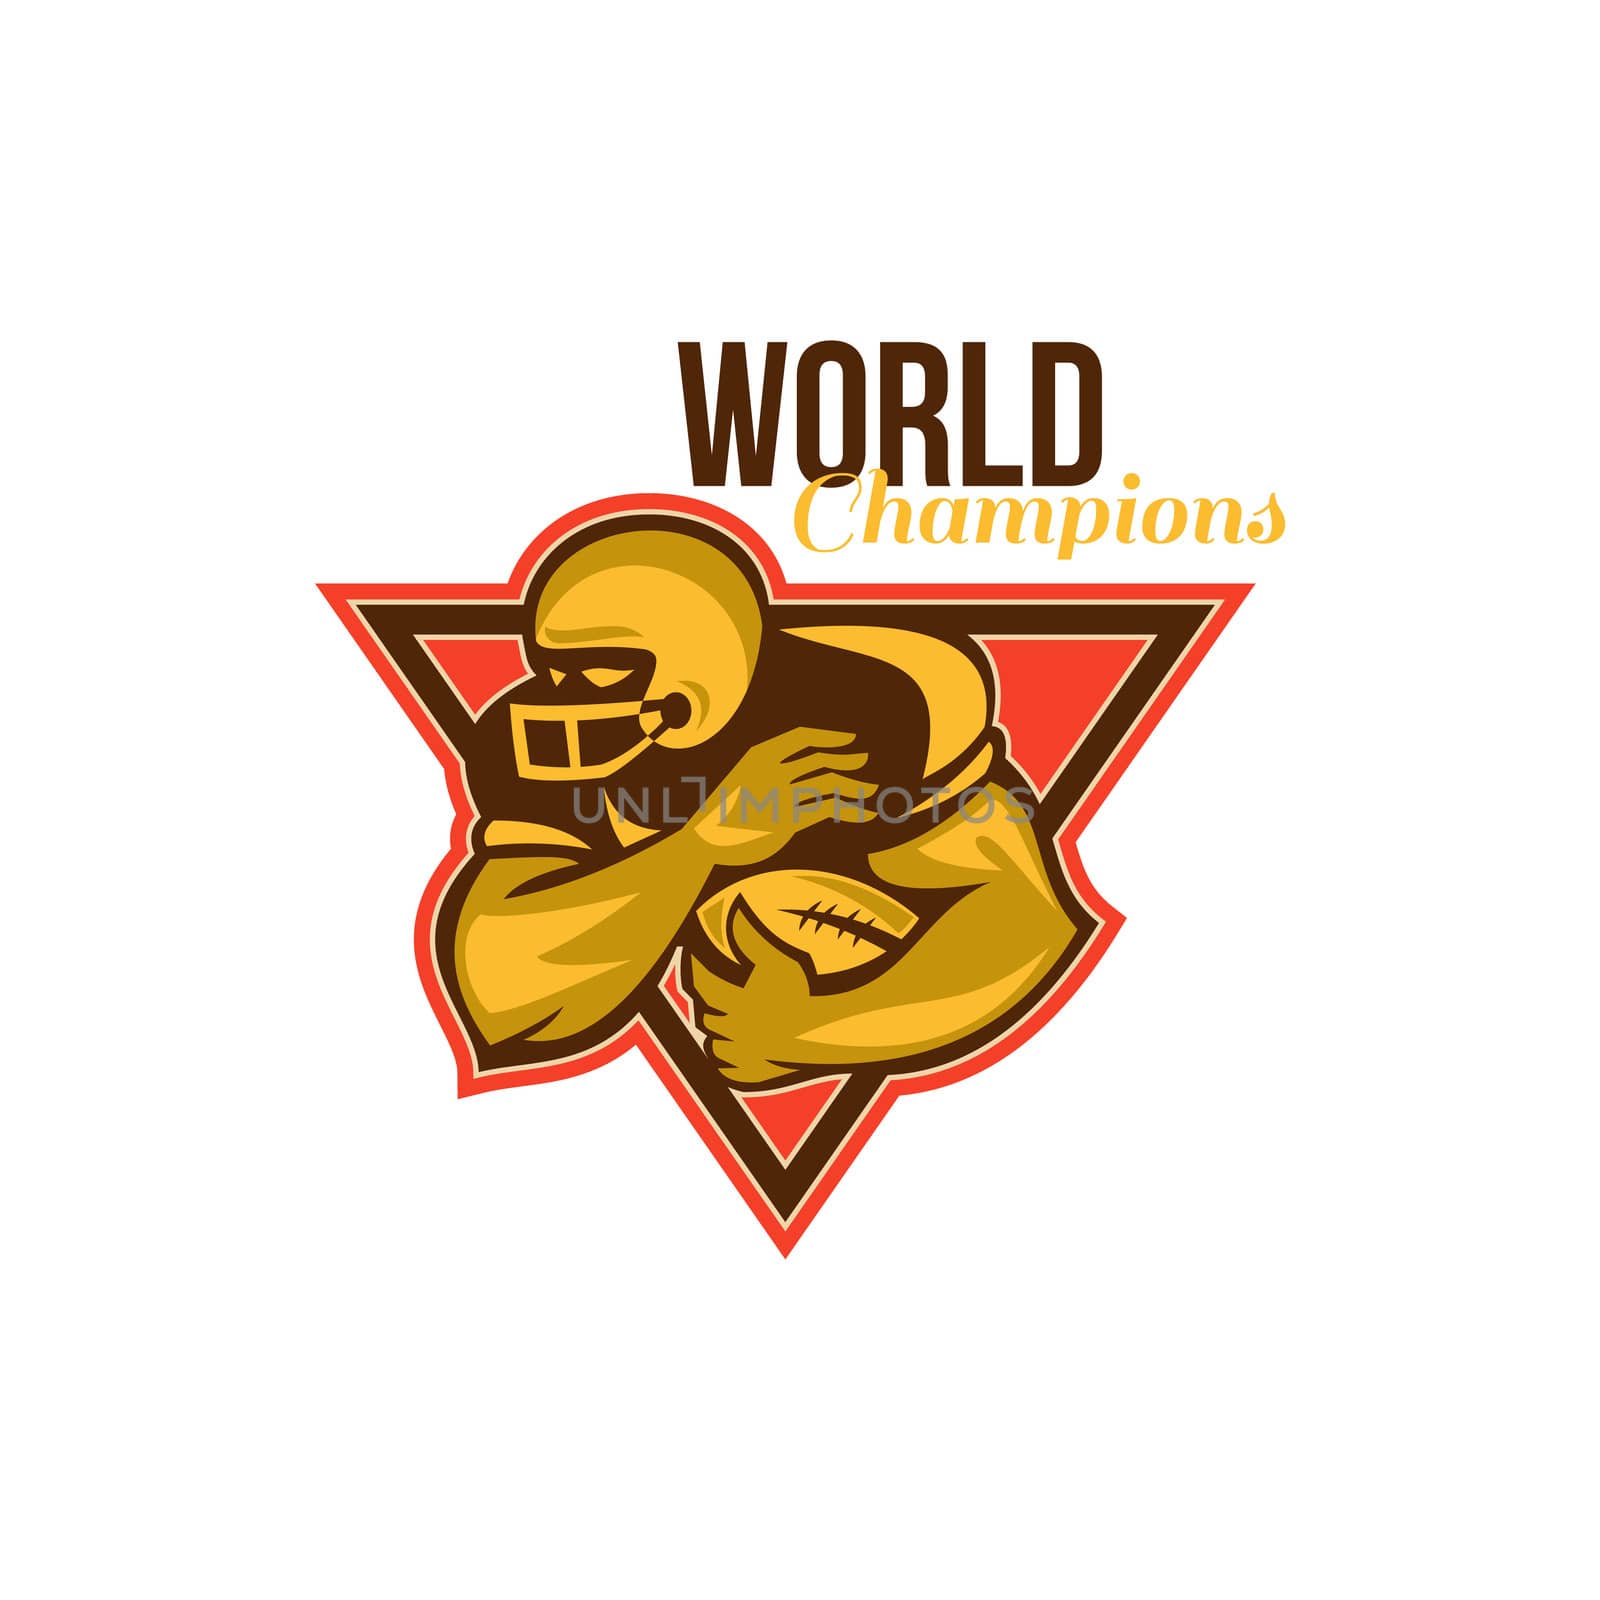 Illustration of an american football gridiron running back player running with ball facing side done in retro style set inside triangle with words World Champions.